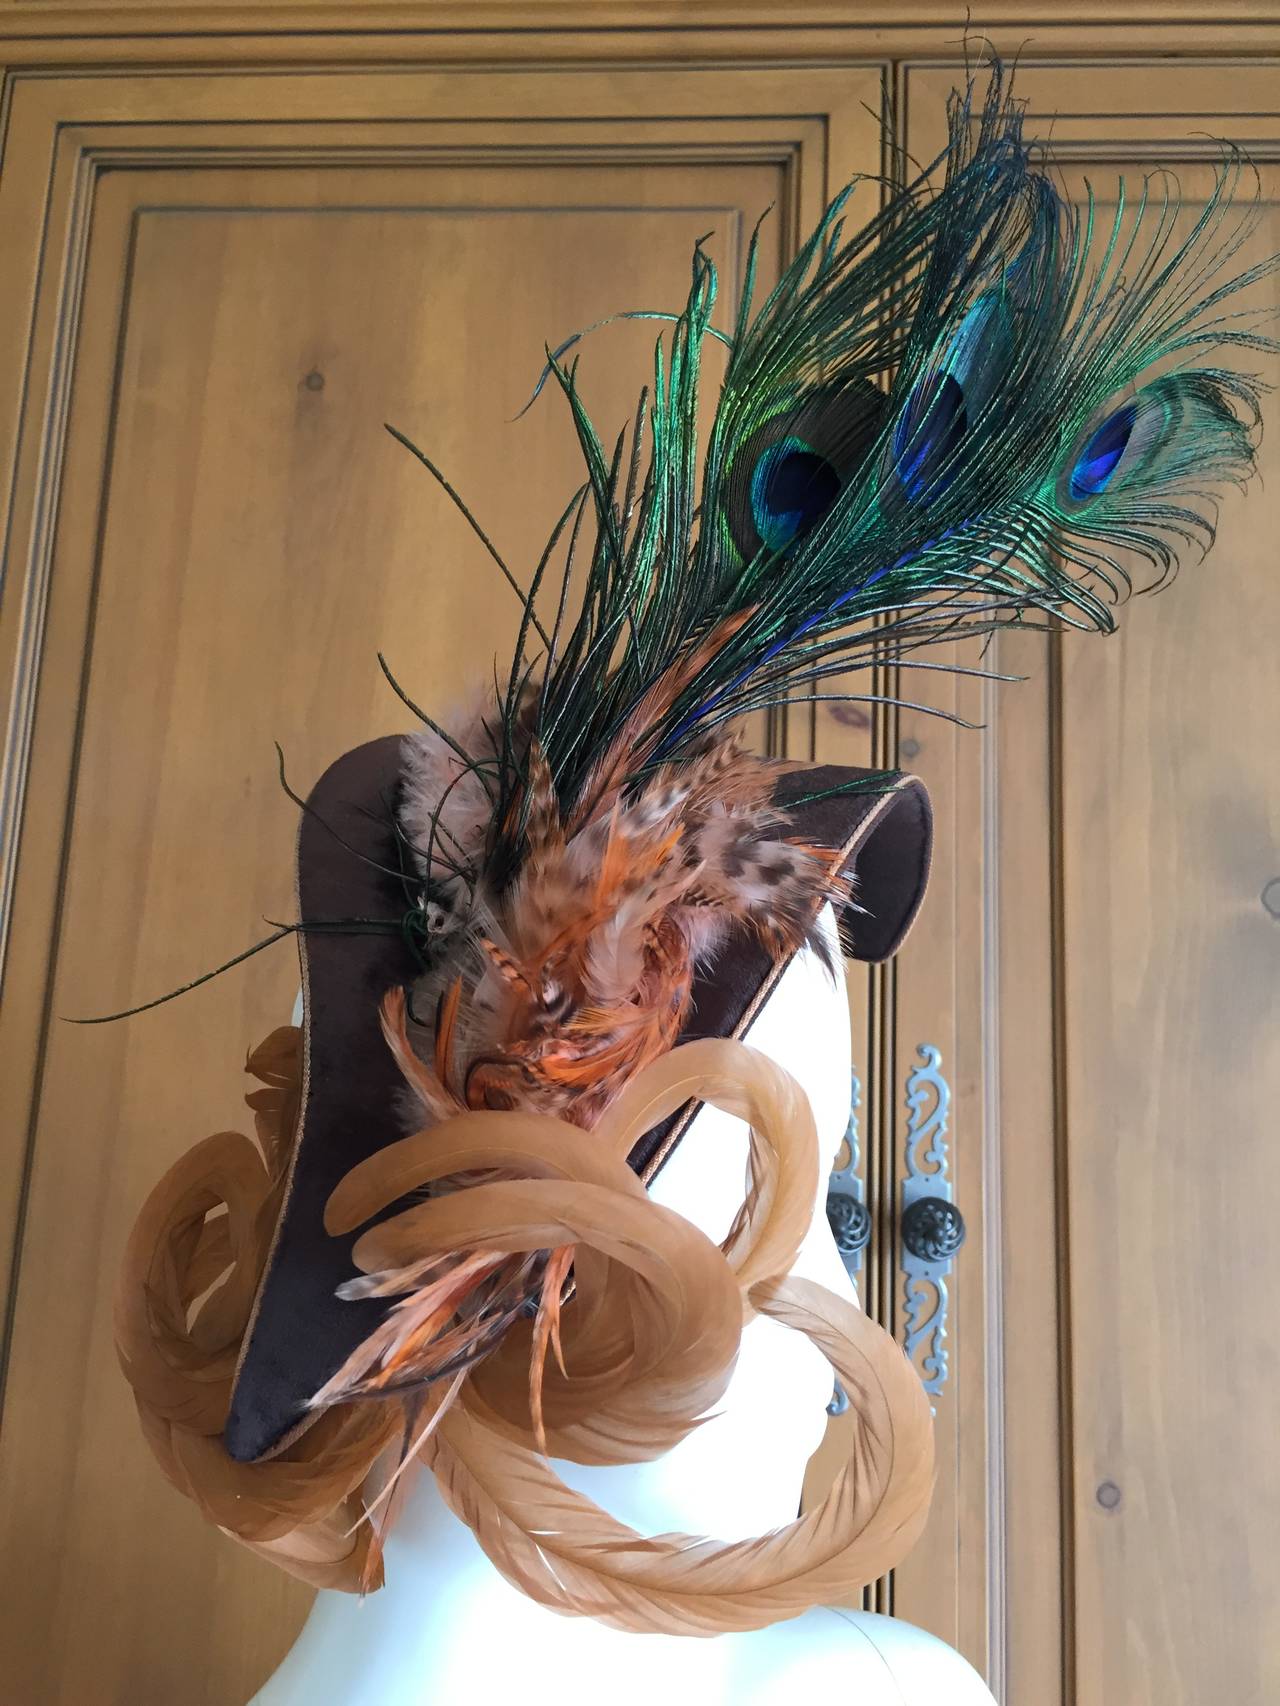 Wonderful vintage adorned with unusual feathers. Featuring Peacock and Bird of Paradise Feathers.
The small hat swoops down , very provocative and alluring, and is festooned with feathers. The top feathers are peacock, but I'm not familiar with the